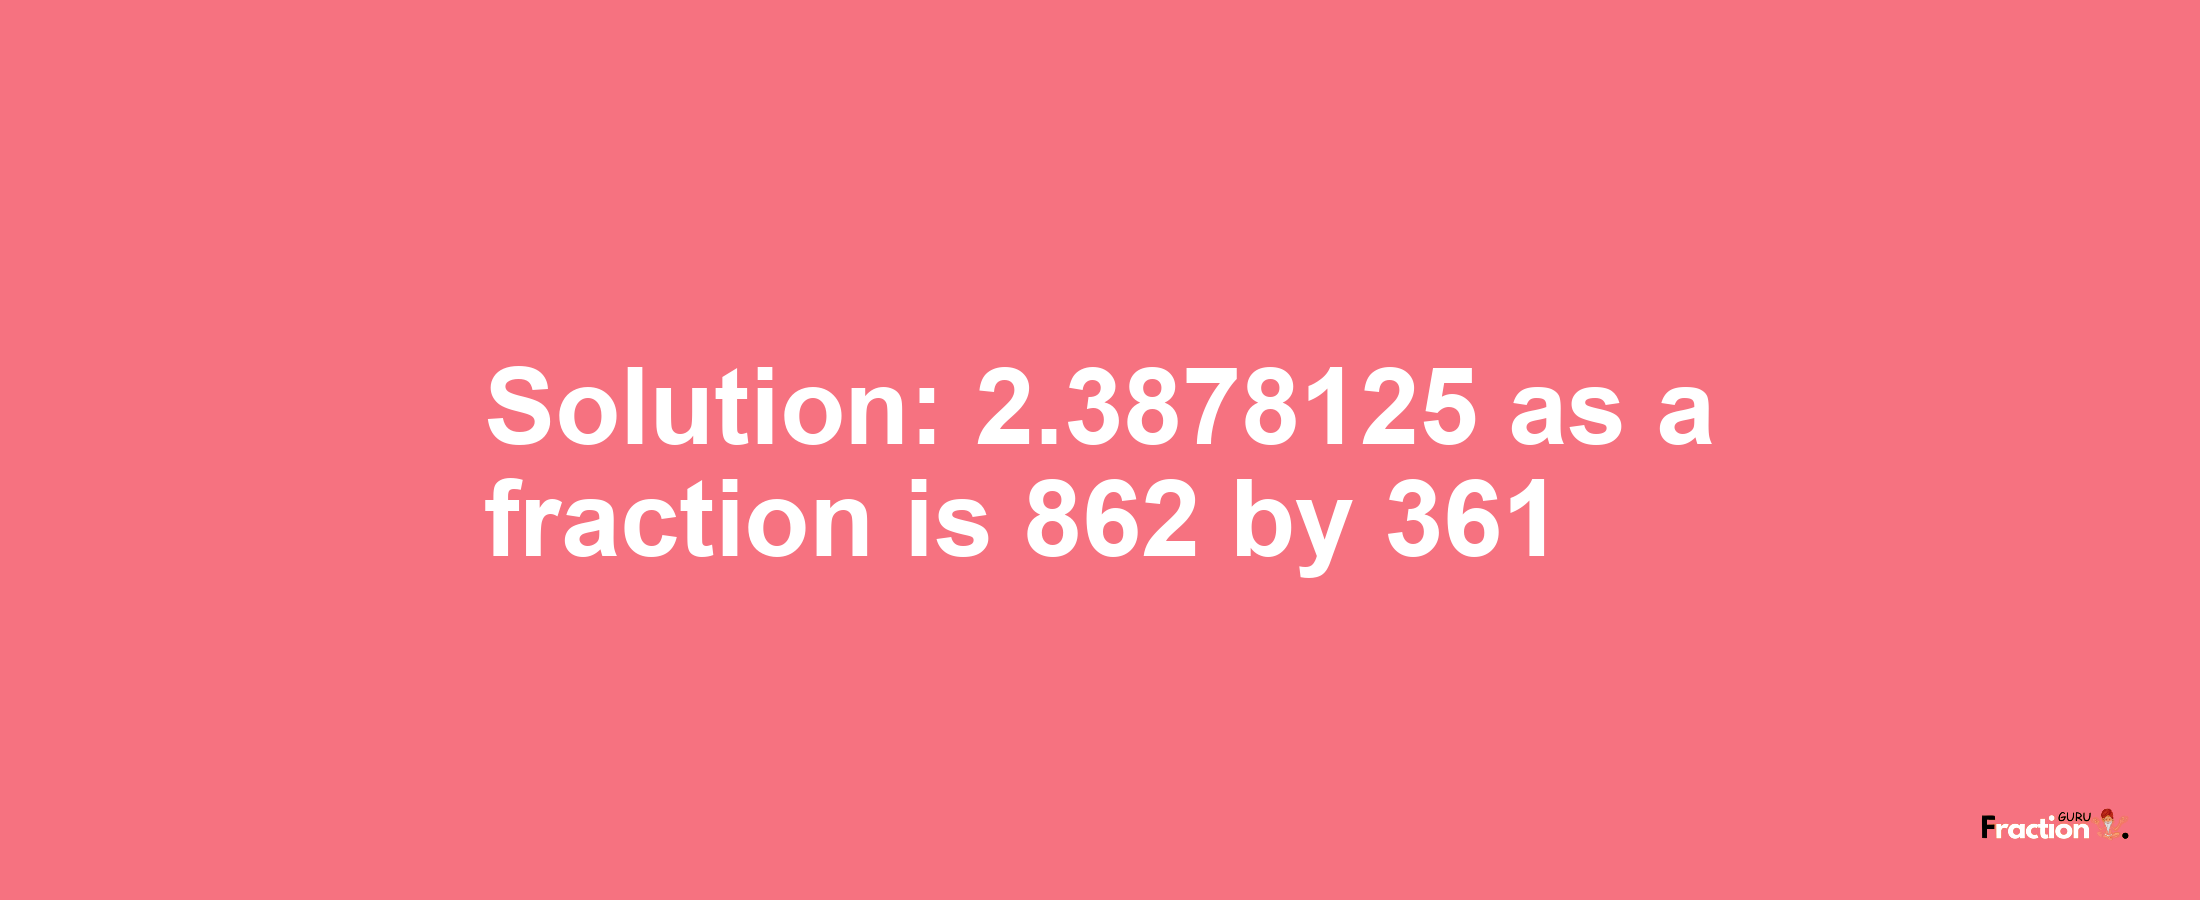 Solution:2.3878125 as a fraction is 862/361